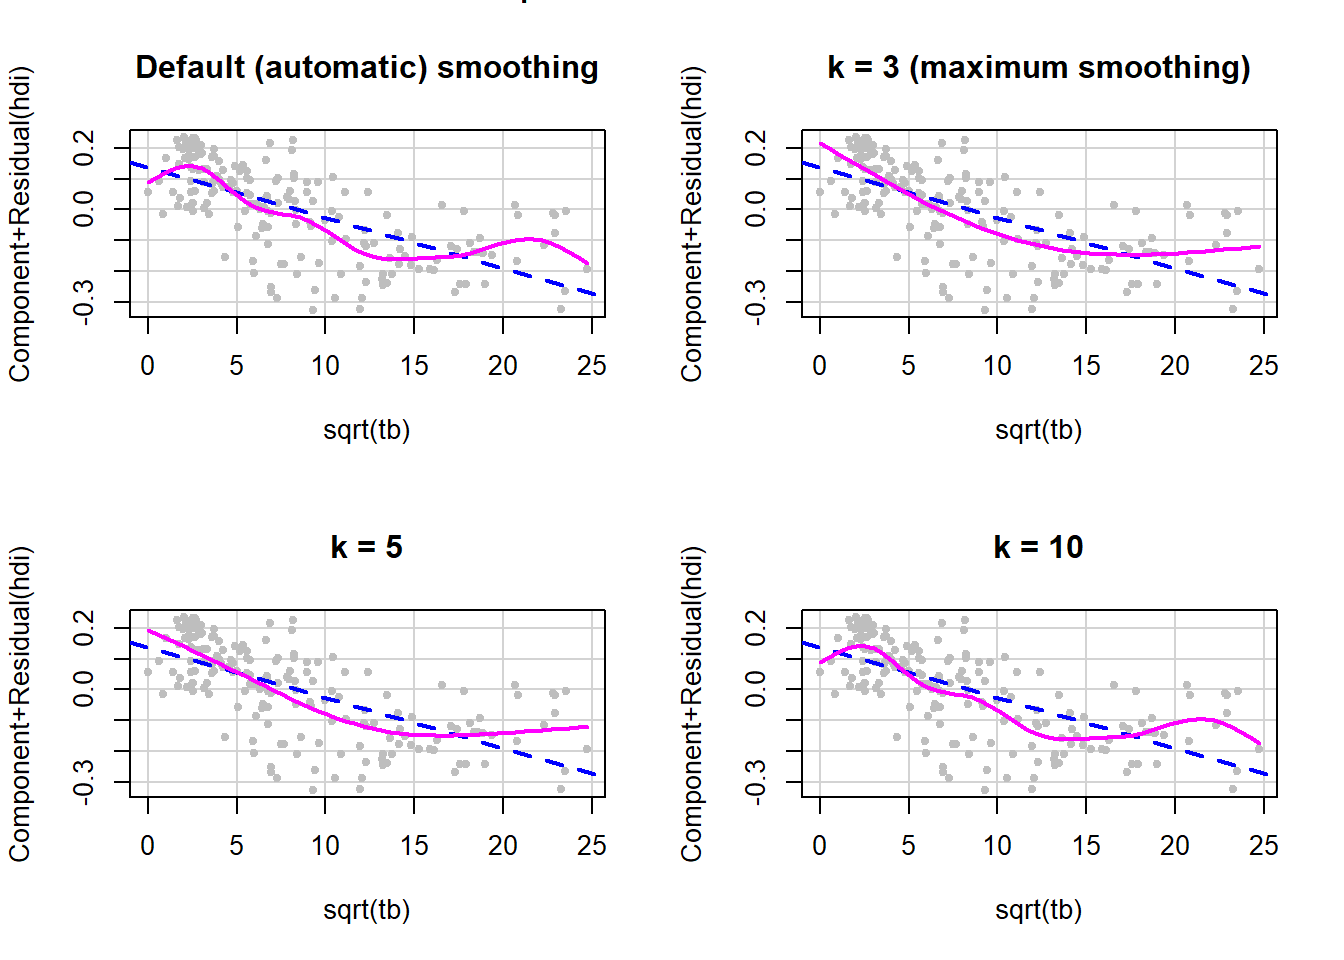 Changing the amount of smoothing in a CR plot